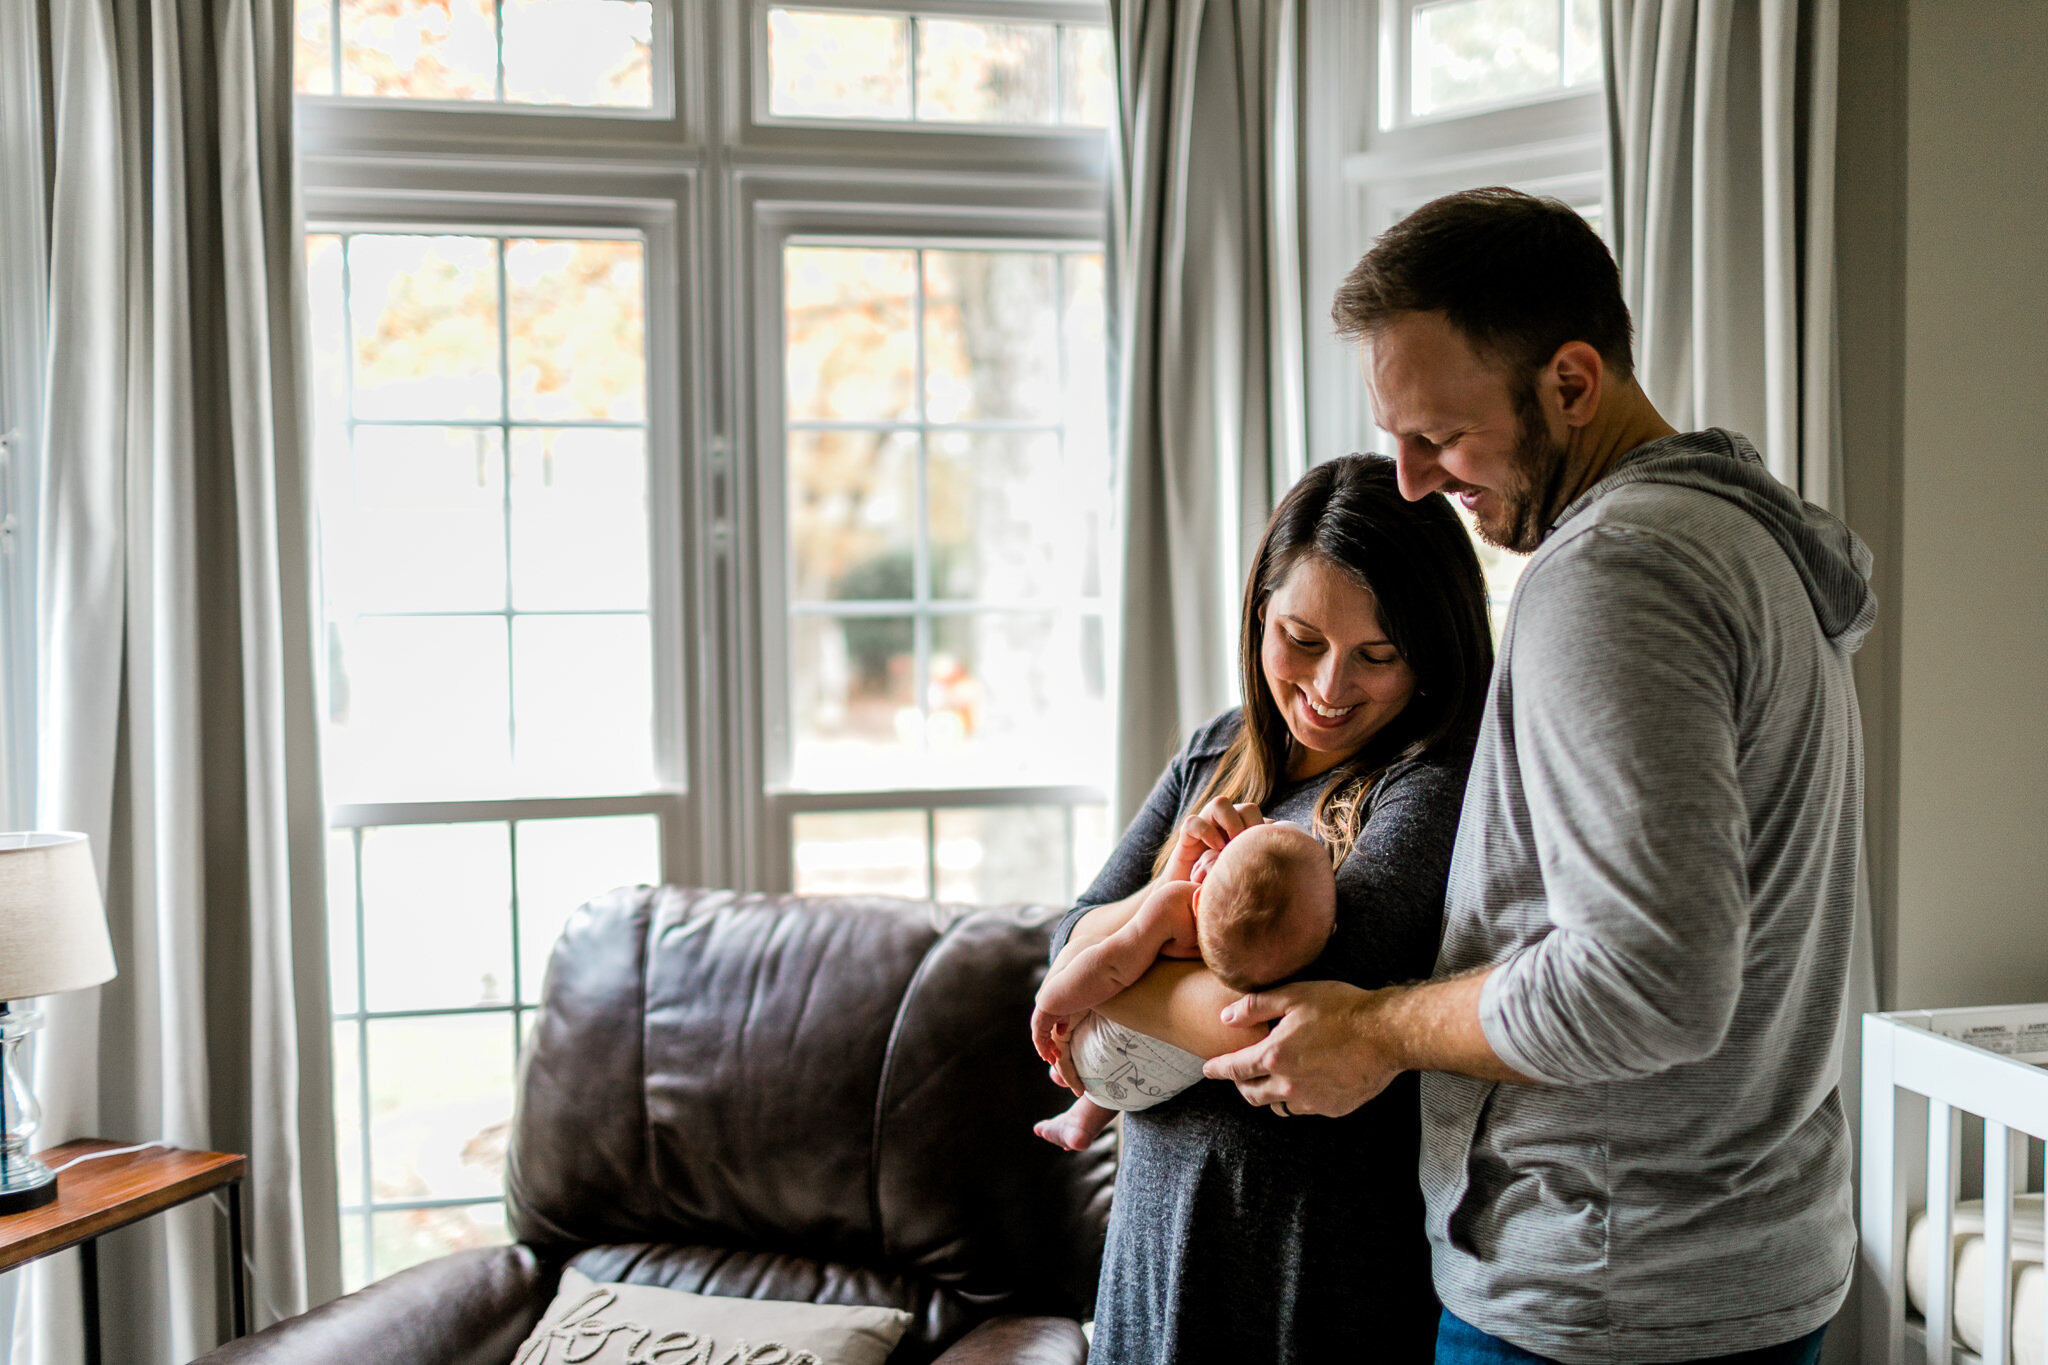 Raleigh Newborn Photography | Lifestyle Session at Home | By G. Lin Photography | Parents holding baby boy by window